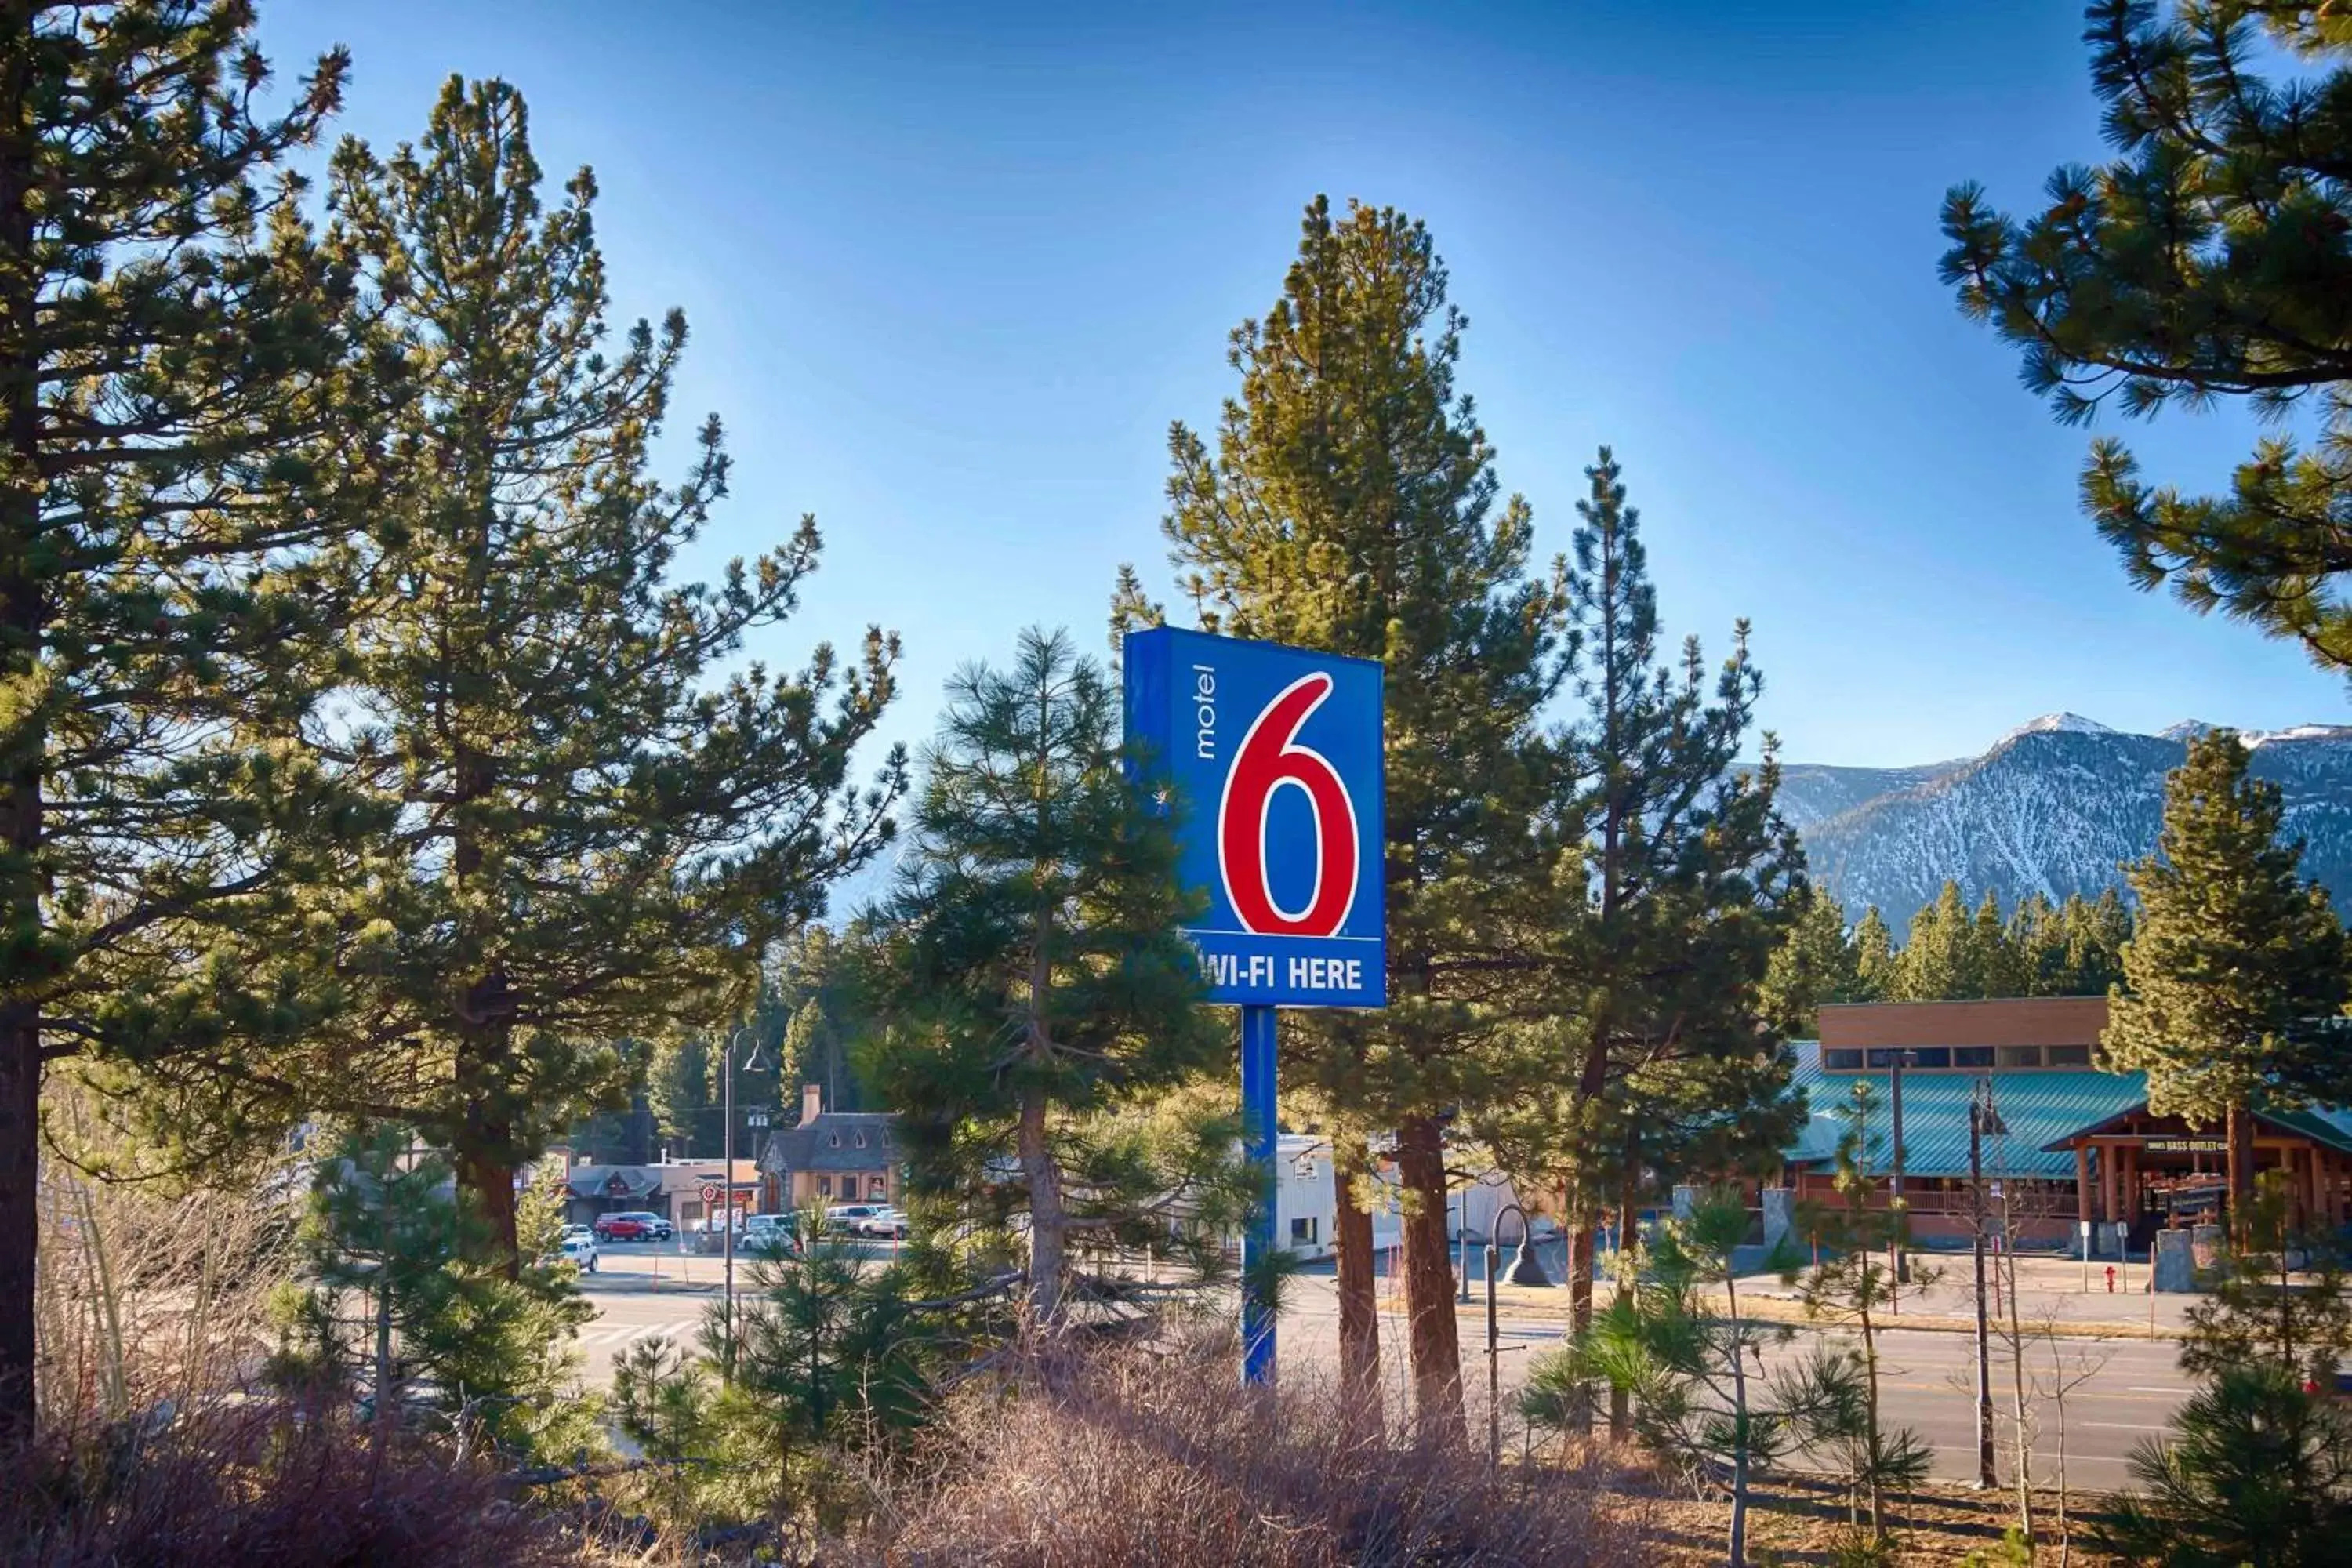 Property building in Motel 6-Mammoth Lakes, CA